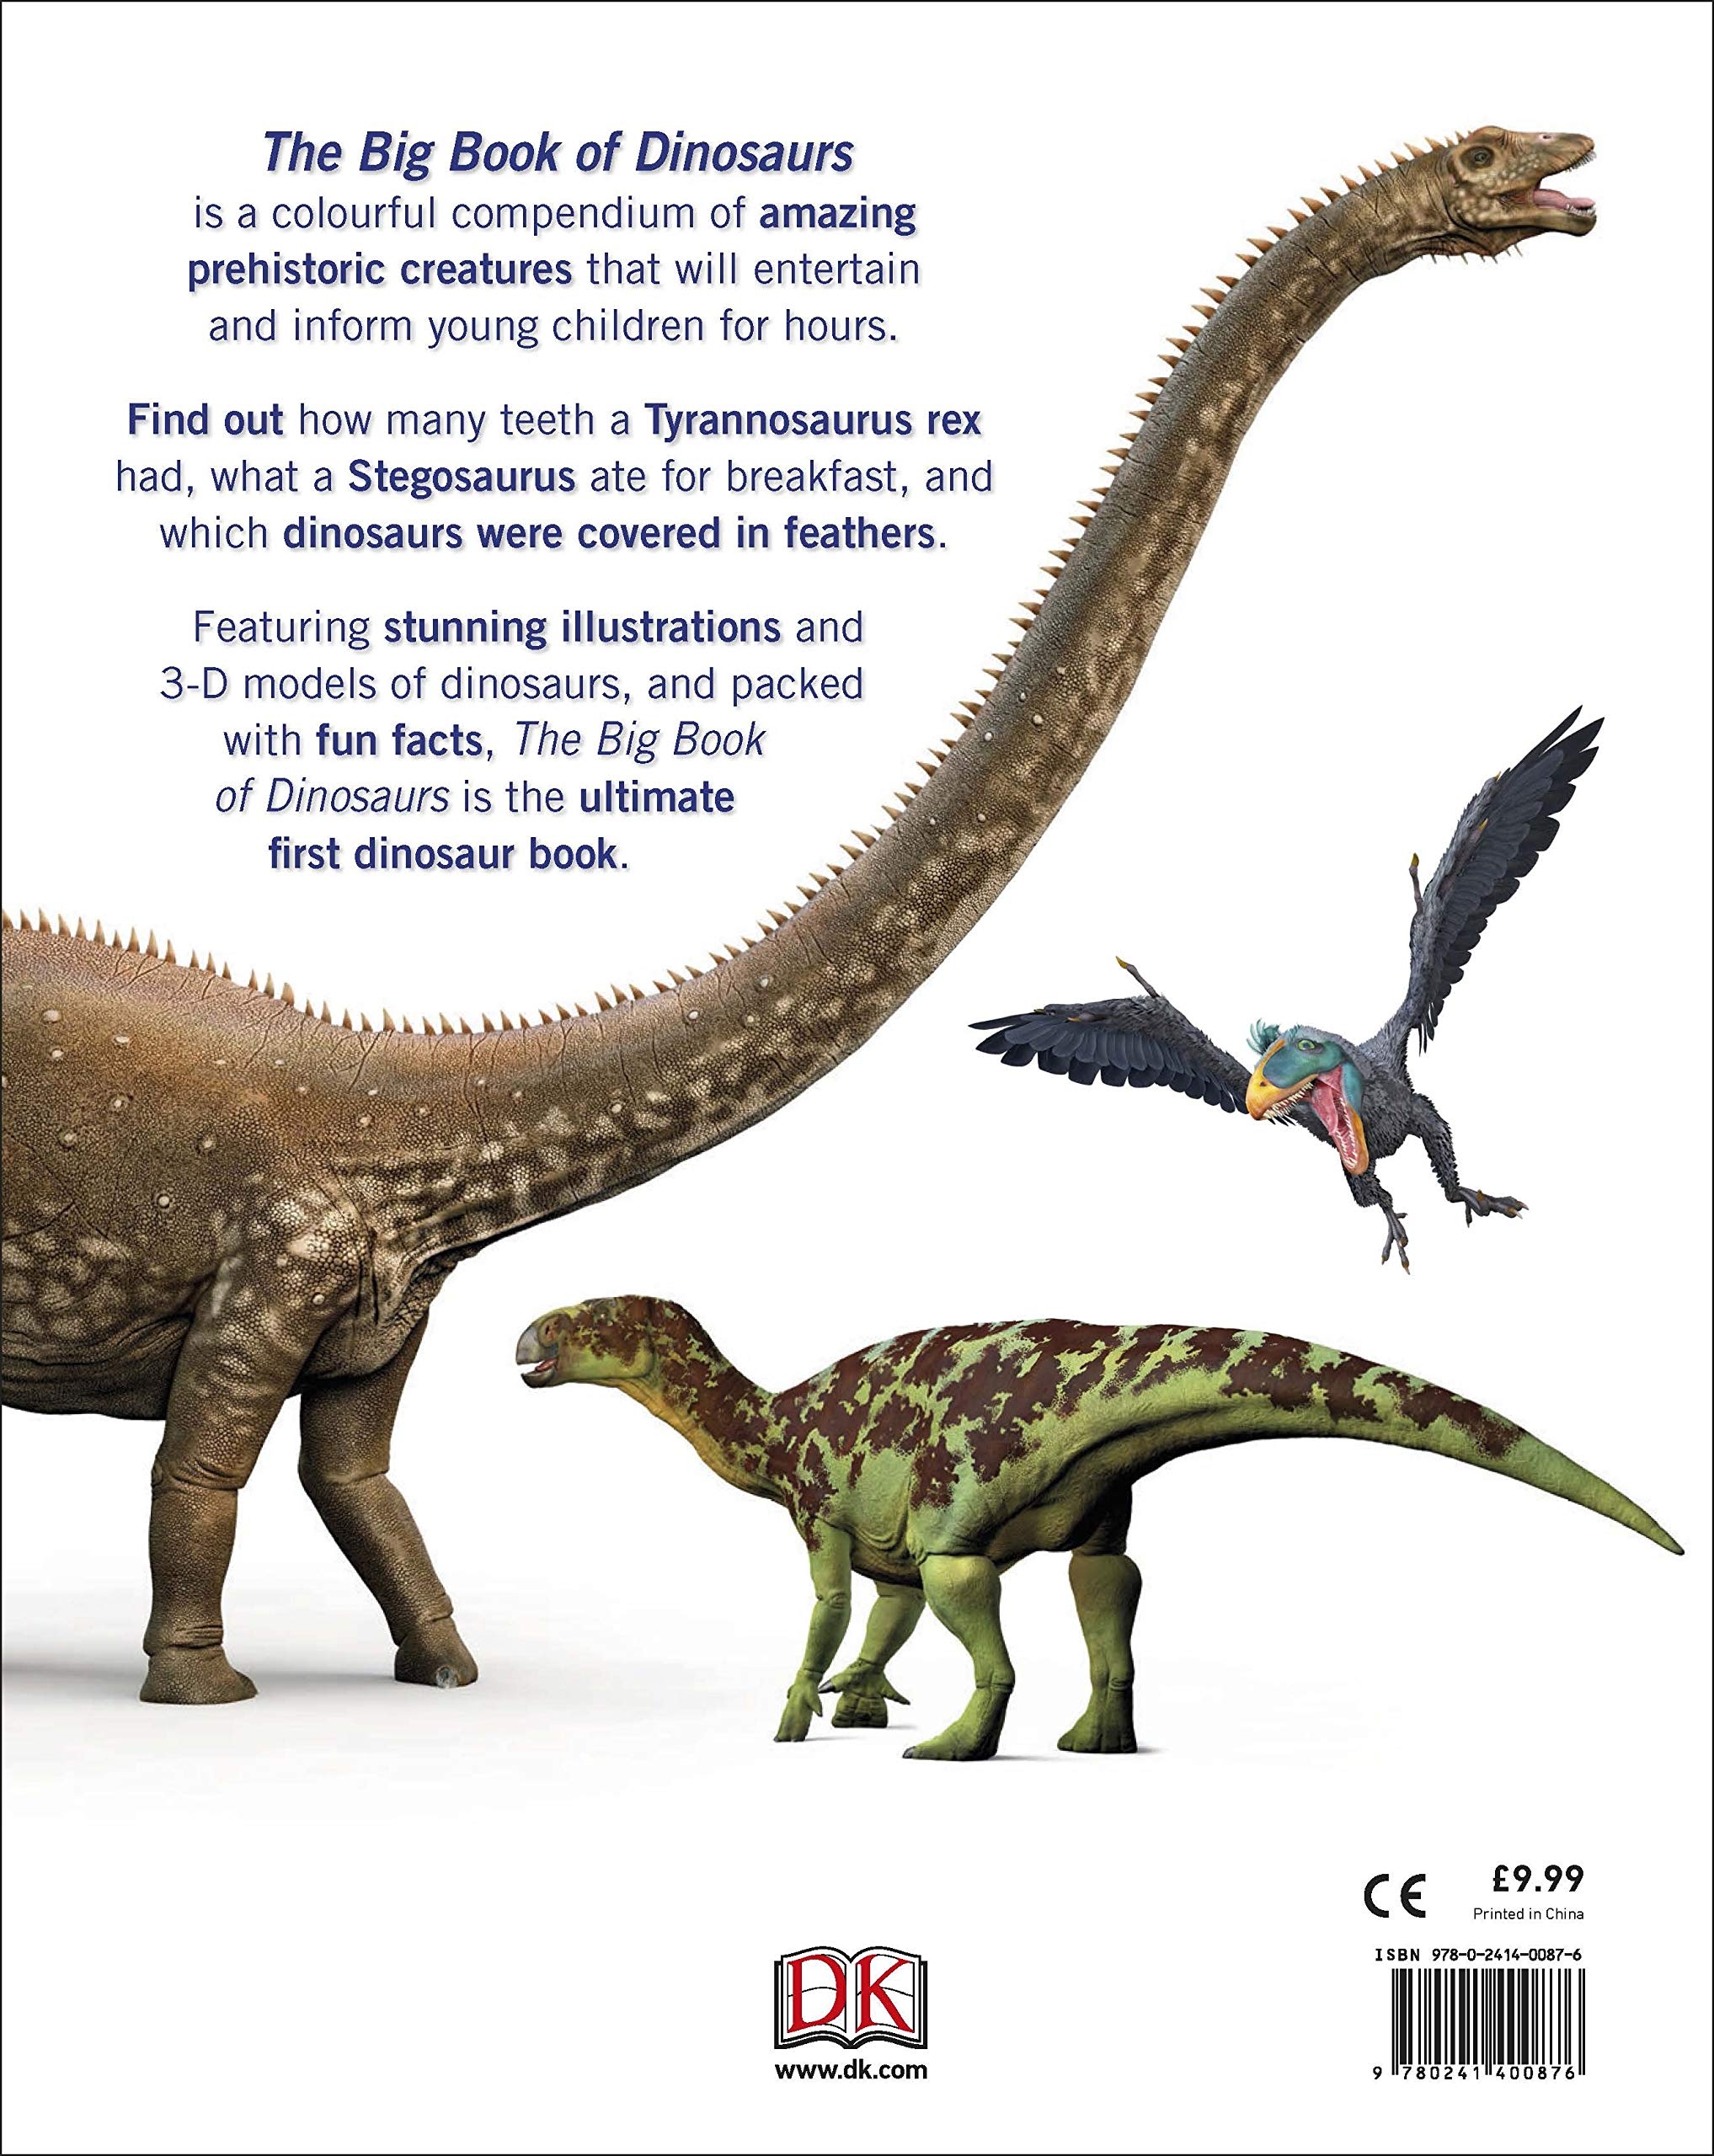 The Big Book of Dinosaurs: Discover the Biggest, Fastest, and Fiercest Dinosaurs (DK)